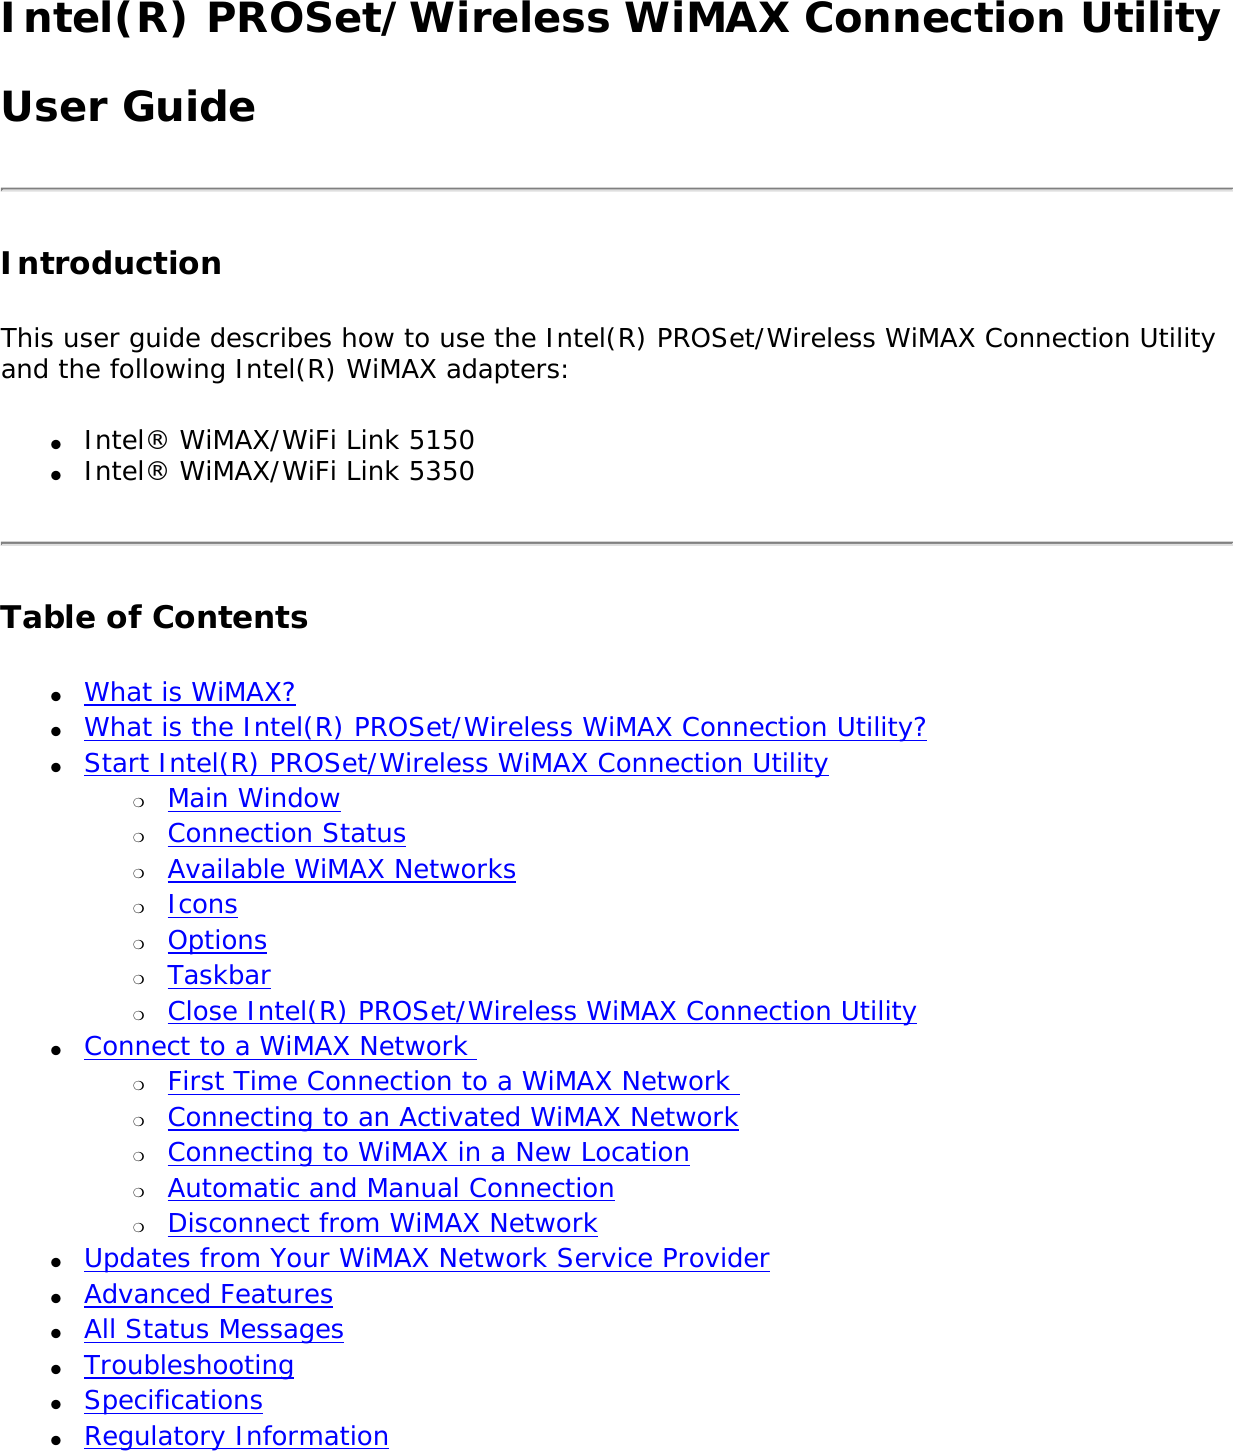 Intel(R) PROSet/Wireless WiMAX Connection UtilityUser GuideIntroductionThis user guide describes how to use the Intel(R) PROSet/Wireless WiMAX Connection Utility and the following Intel(R) WiMAX adapters: ●     Intel® WiMAX/WiFi Link 5150●     Intel® WiMAX/WiFi Link 5350Table of Contents●     What is WiMAX?●     What is the Intel(R) PROSet/Wireless WiMAX Connection Utility?●     Start Intel(R) PROSet/Wireless WiMAX Connection Utility ❍     Main Window❍     Connection Status❍     Available WiMAX Networks❍     Icons❍     Options❍     Taskbar❍     Close Intel(R) PROSet/Wireless WiMAX Connection Utility●     Connect to a WiMAX Network ❍     First Time Connection to a WiMAX Network ❍     Connecting to an Activated WiMAX Network❍     Connecting to WiMAX in a New Location ❍     Automatic and Manual Connection❍     Disconnect from WiMAX Network ●     Updates from Your WiMAX Network Service Provider ●     Advanced Features●     All Status Messages●     Troubleshooting●     Specifications●     Regulatory Information 